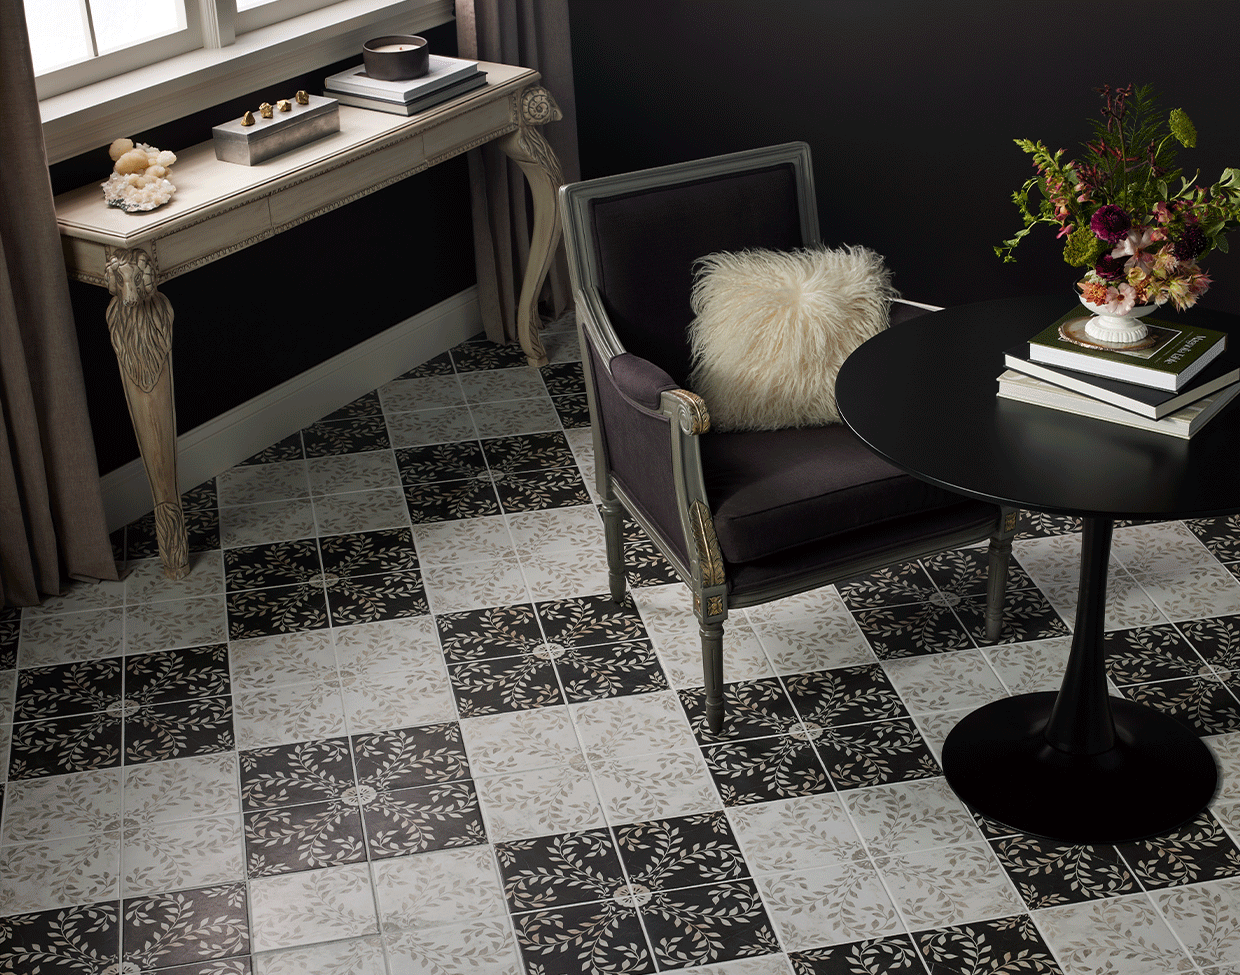 Dining room with chair and table and checkerboard black and white with floral design floor. The room slowly transitions from dim evening light to golden hour lighting.